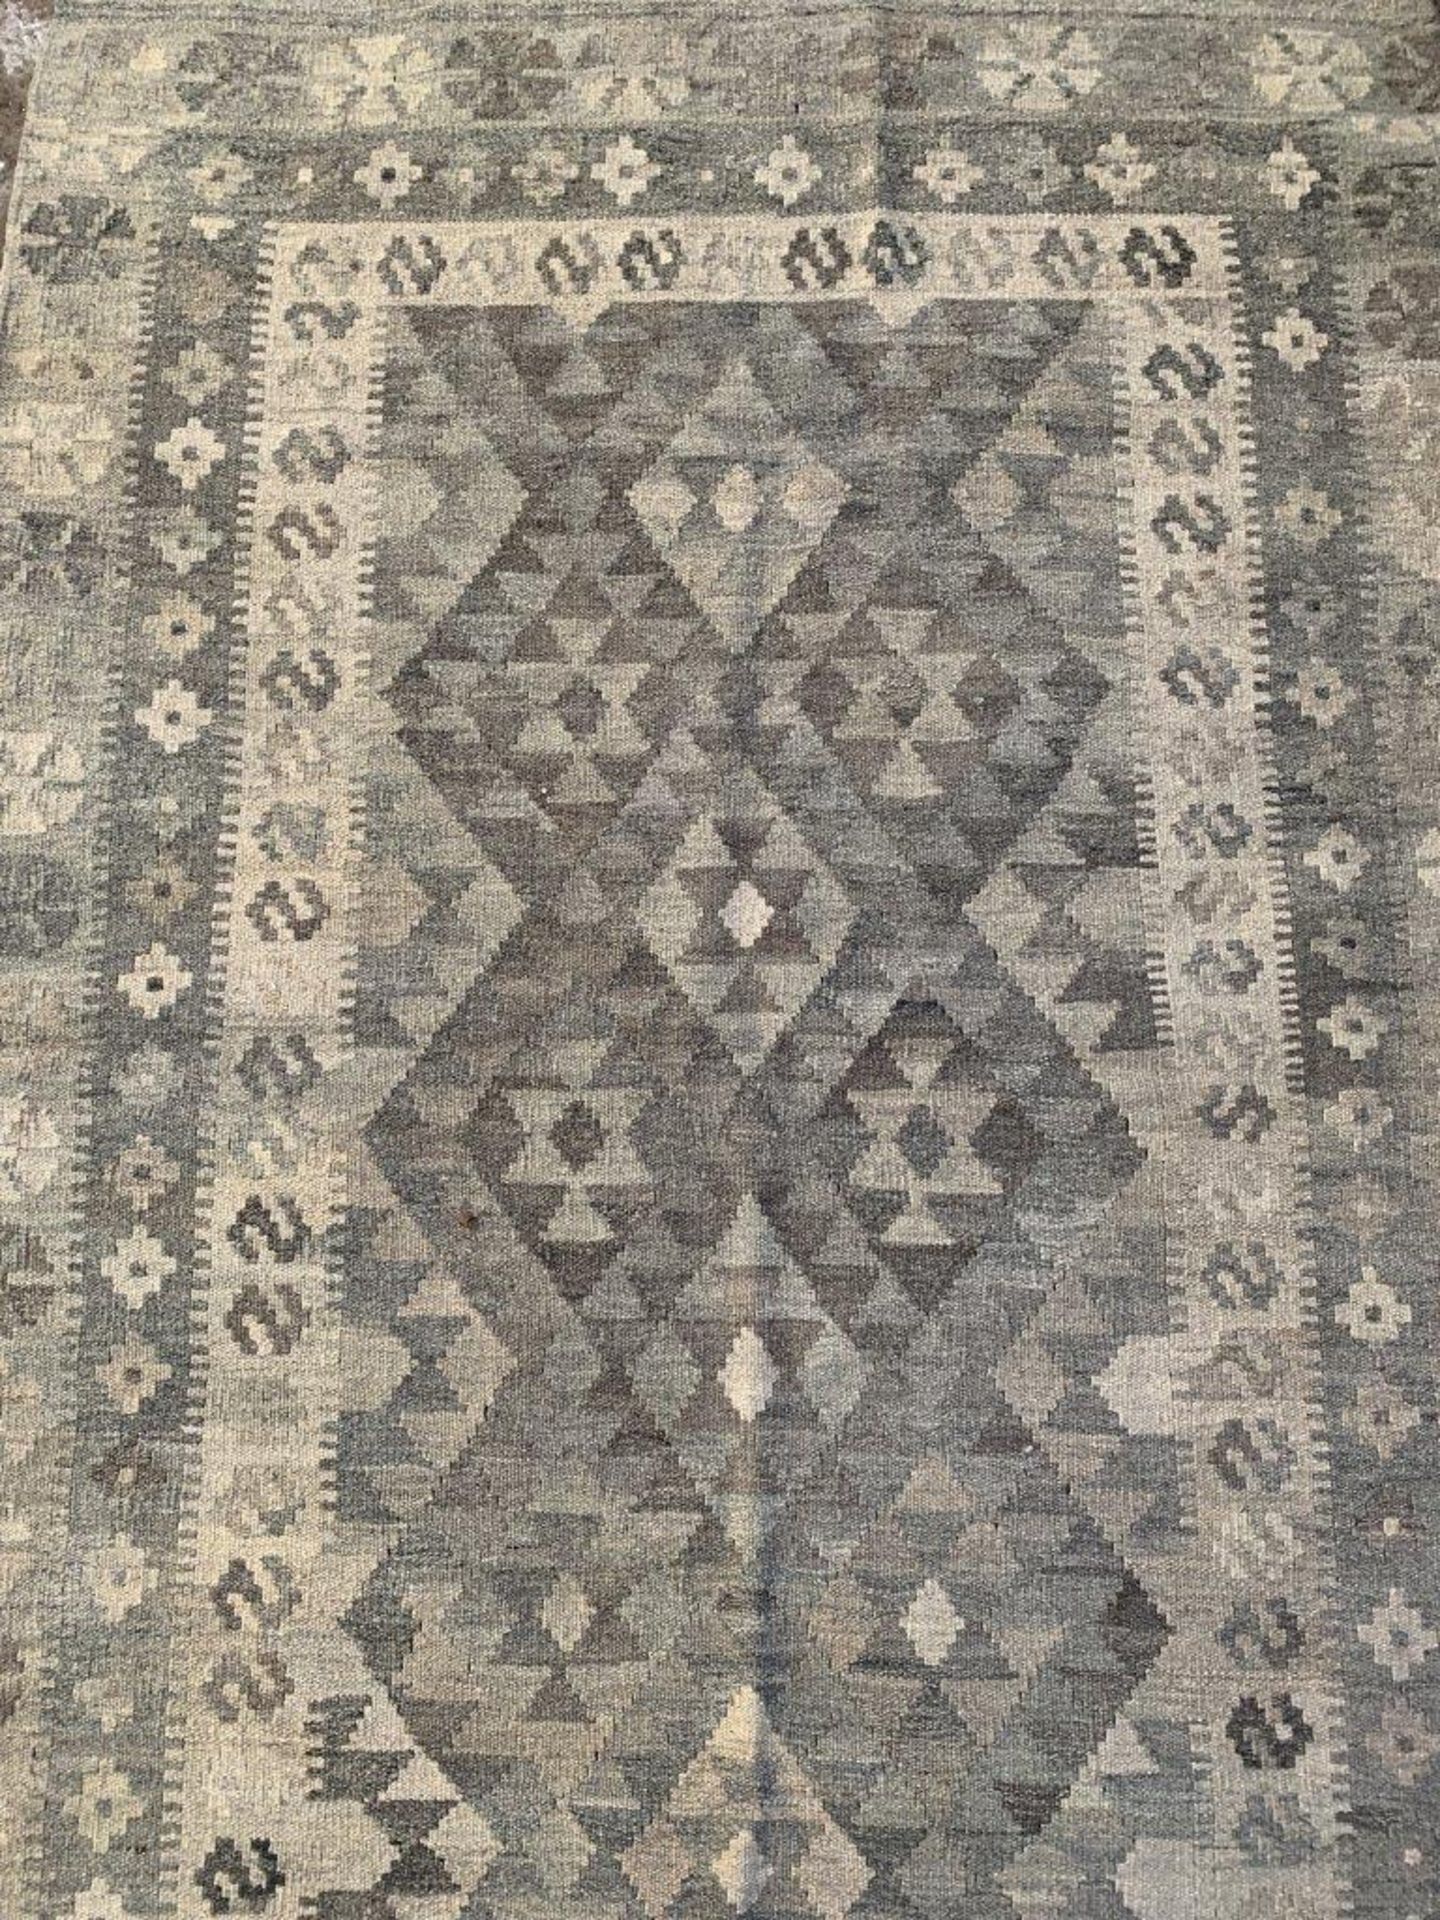 Two grey rugs - Image 3 of 6